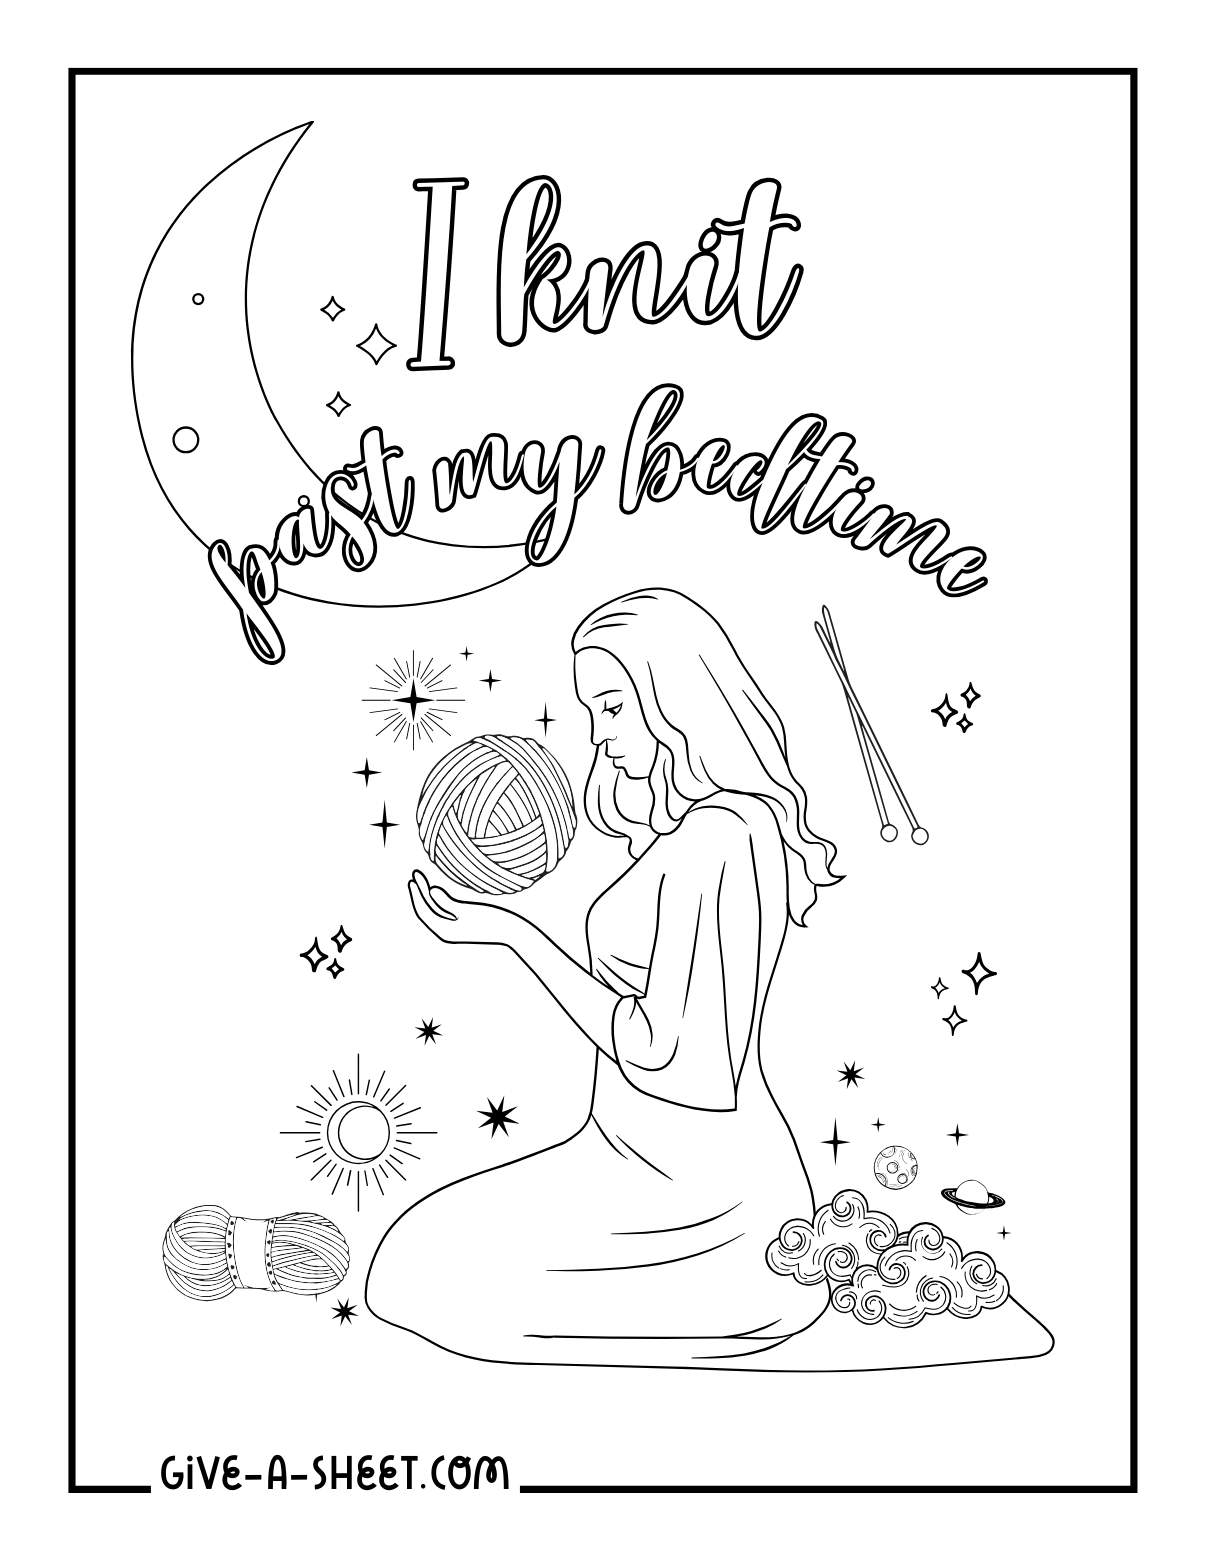 Artwork of a woman knitting coloring page for adults.